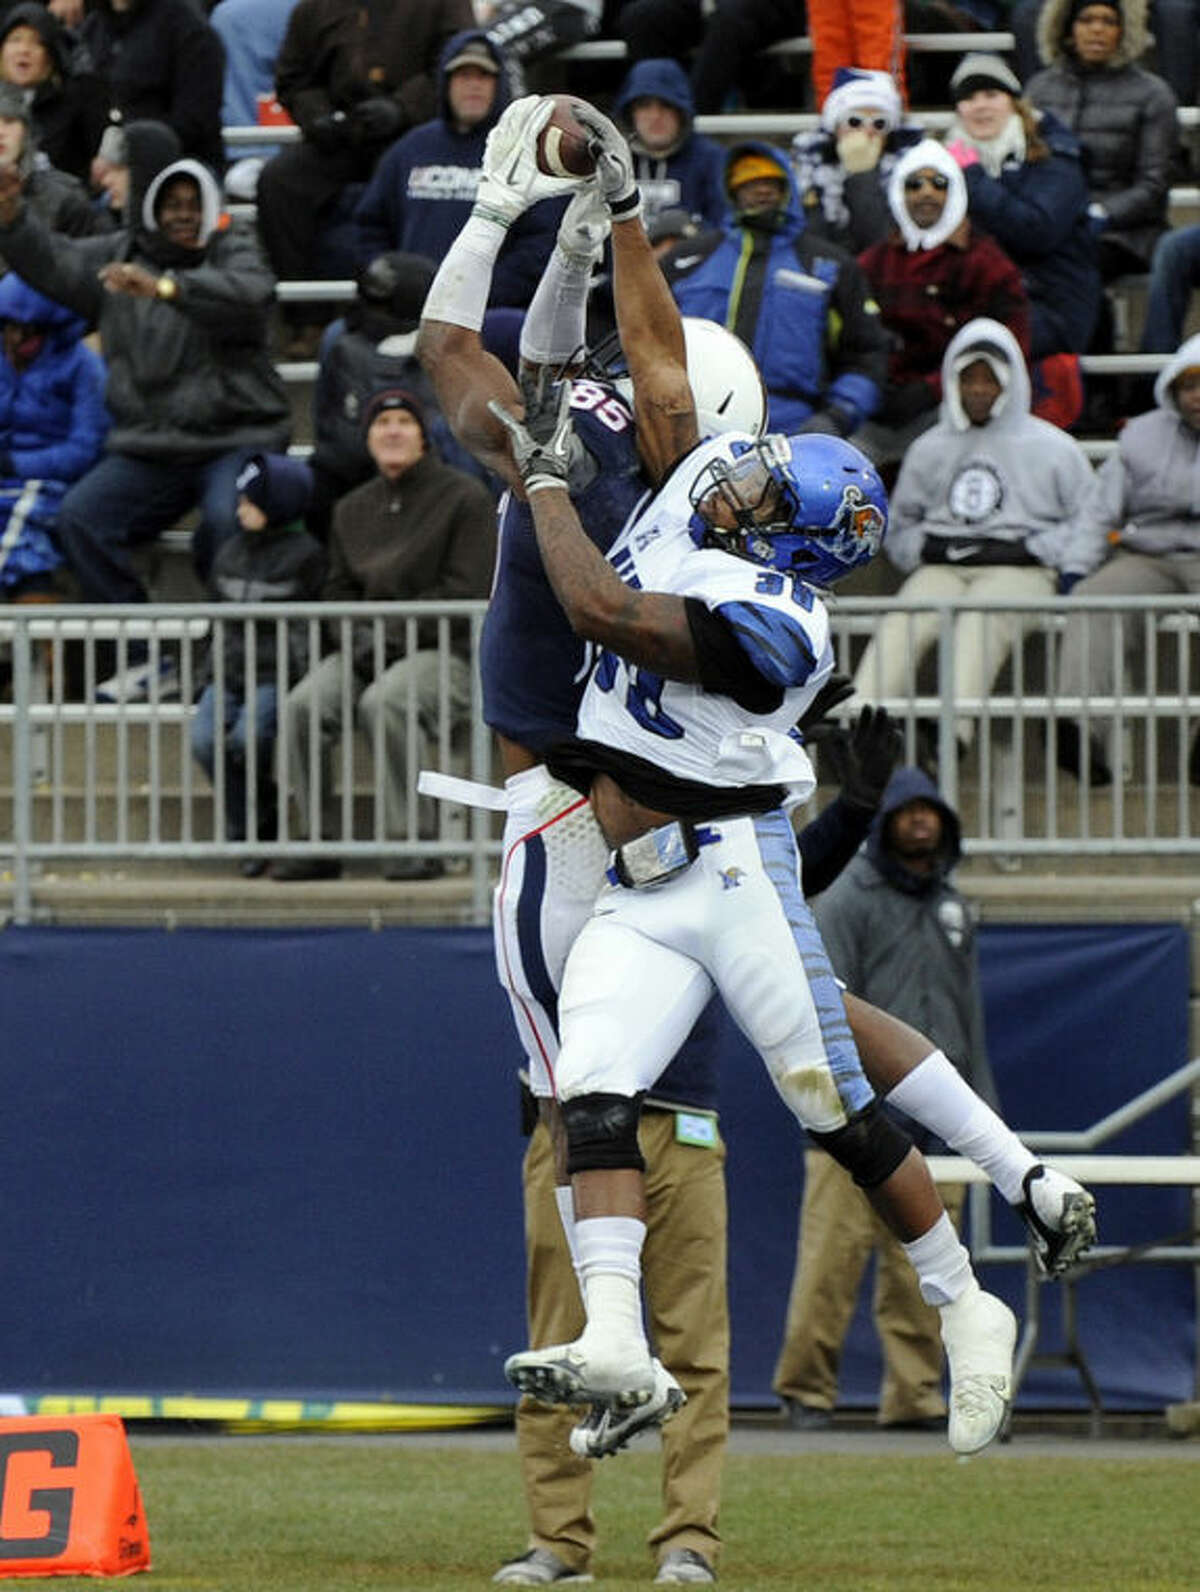 Connecticut wide receiver Geremy Davis (85) catches a touchdown pass over Memphis defensive back Reggis Ball (39) during the first half of an NCAA college football game in East Hartford, Conn., on Saturday, Dec. 7, 2013. (AP Photo/Fred Beckham)